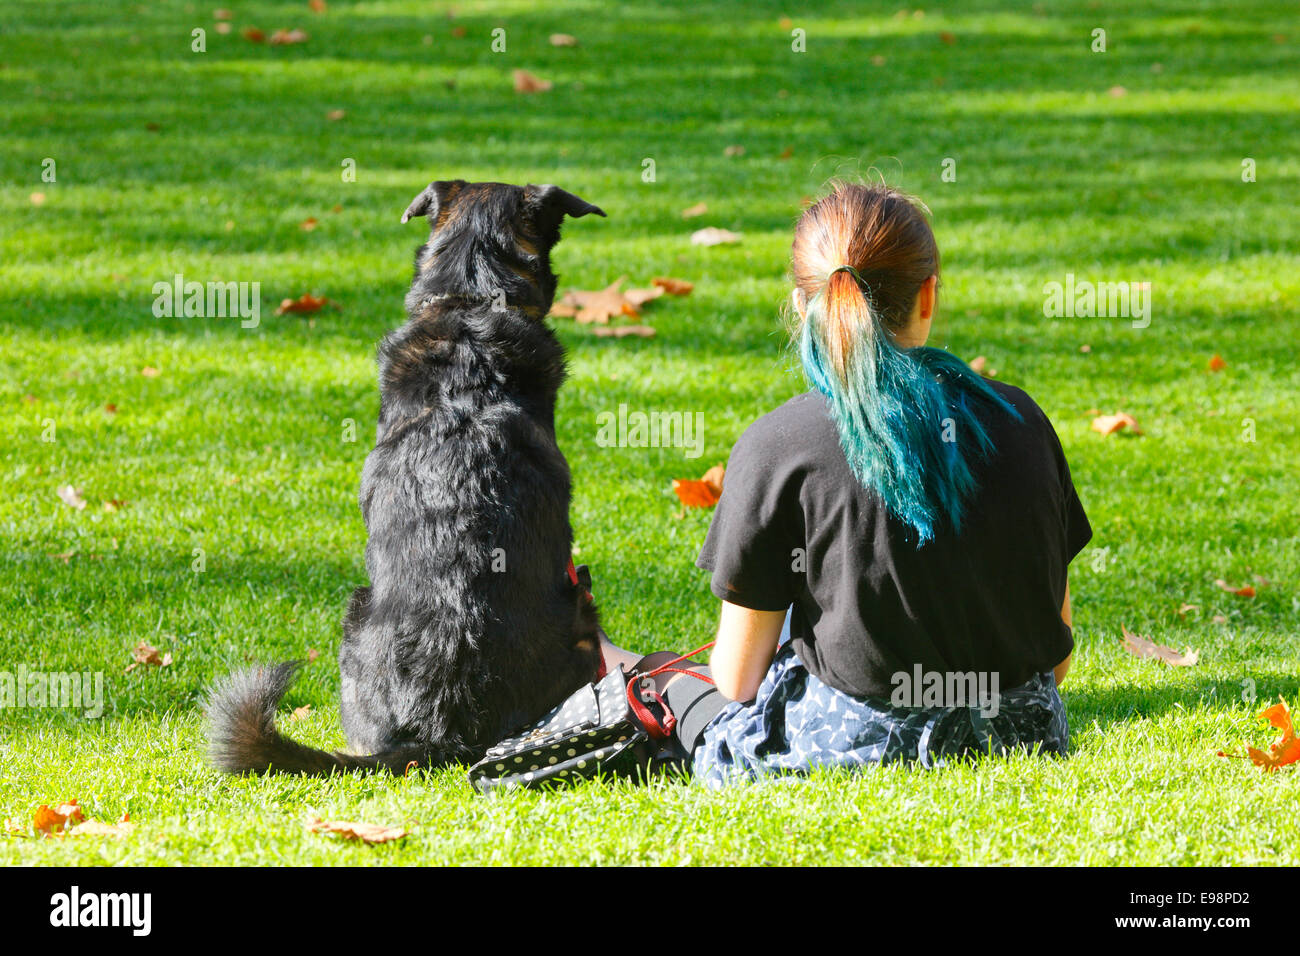 Girl and the dog resting on the grass Stock Photo